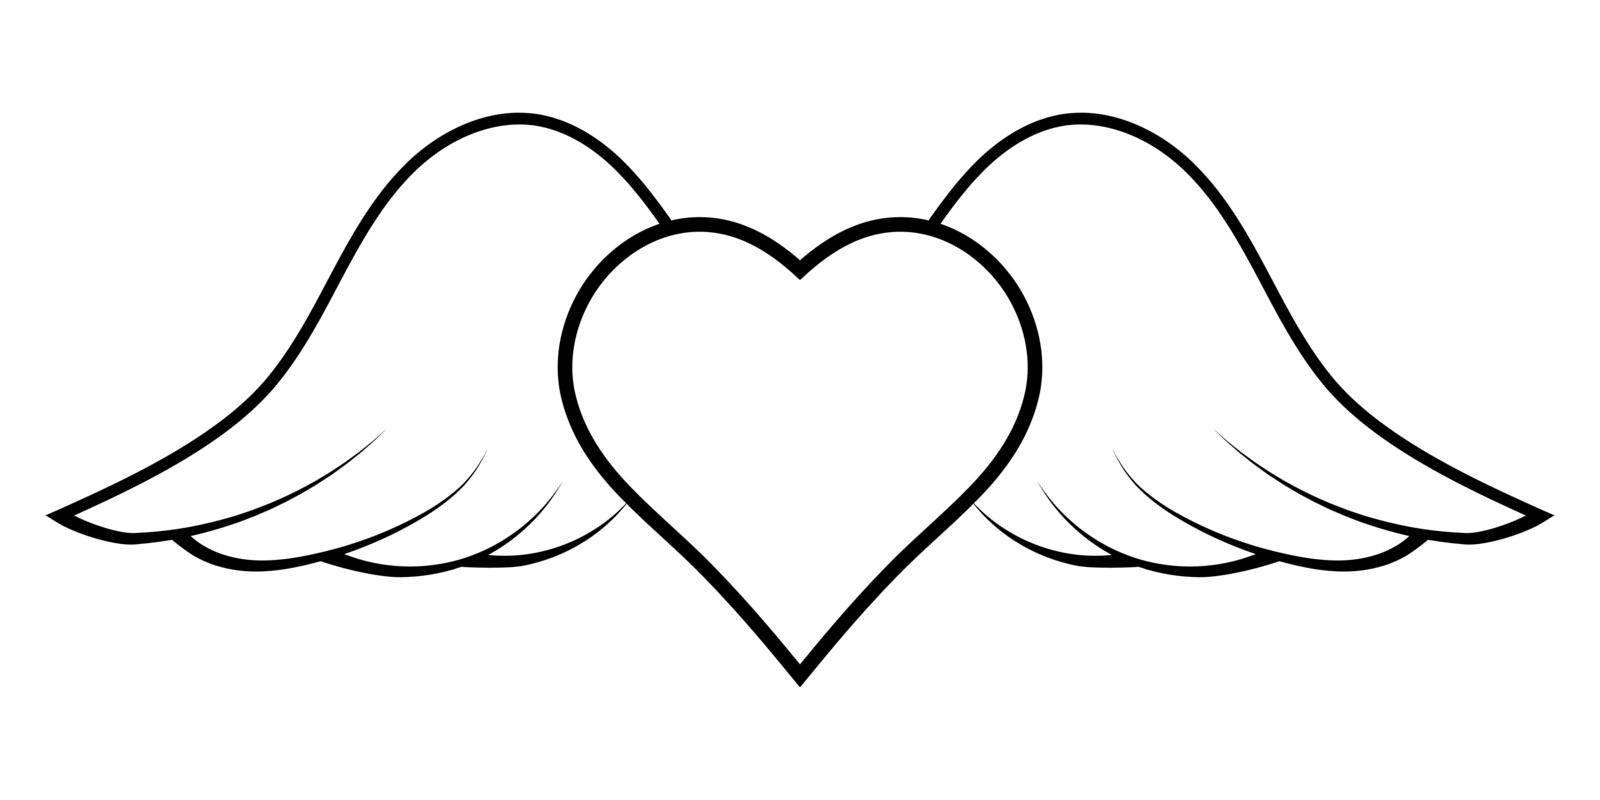 Flying heart with wings, a symbol of cupid bringing love by koksikoks